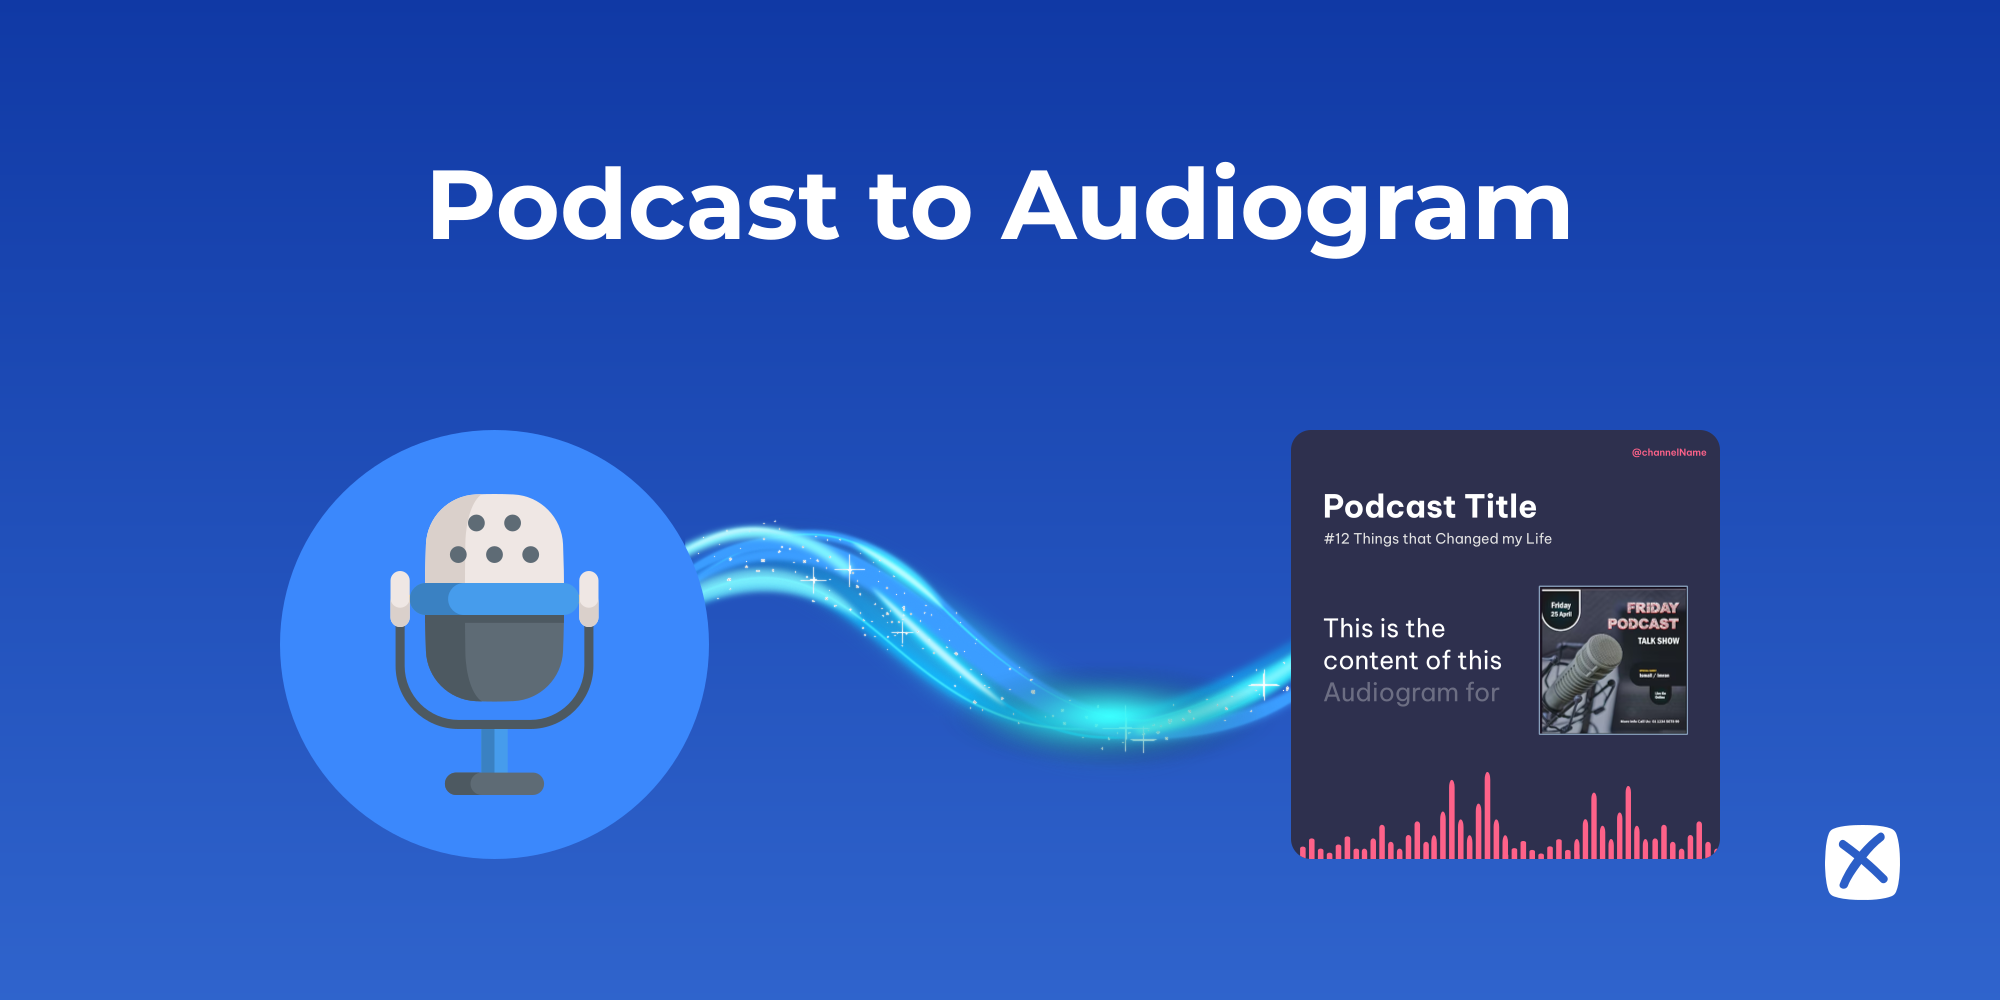 Best Way to Promote Your Podcast With Audiogram